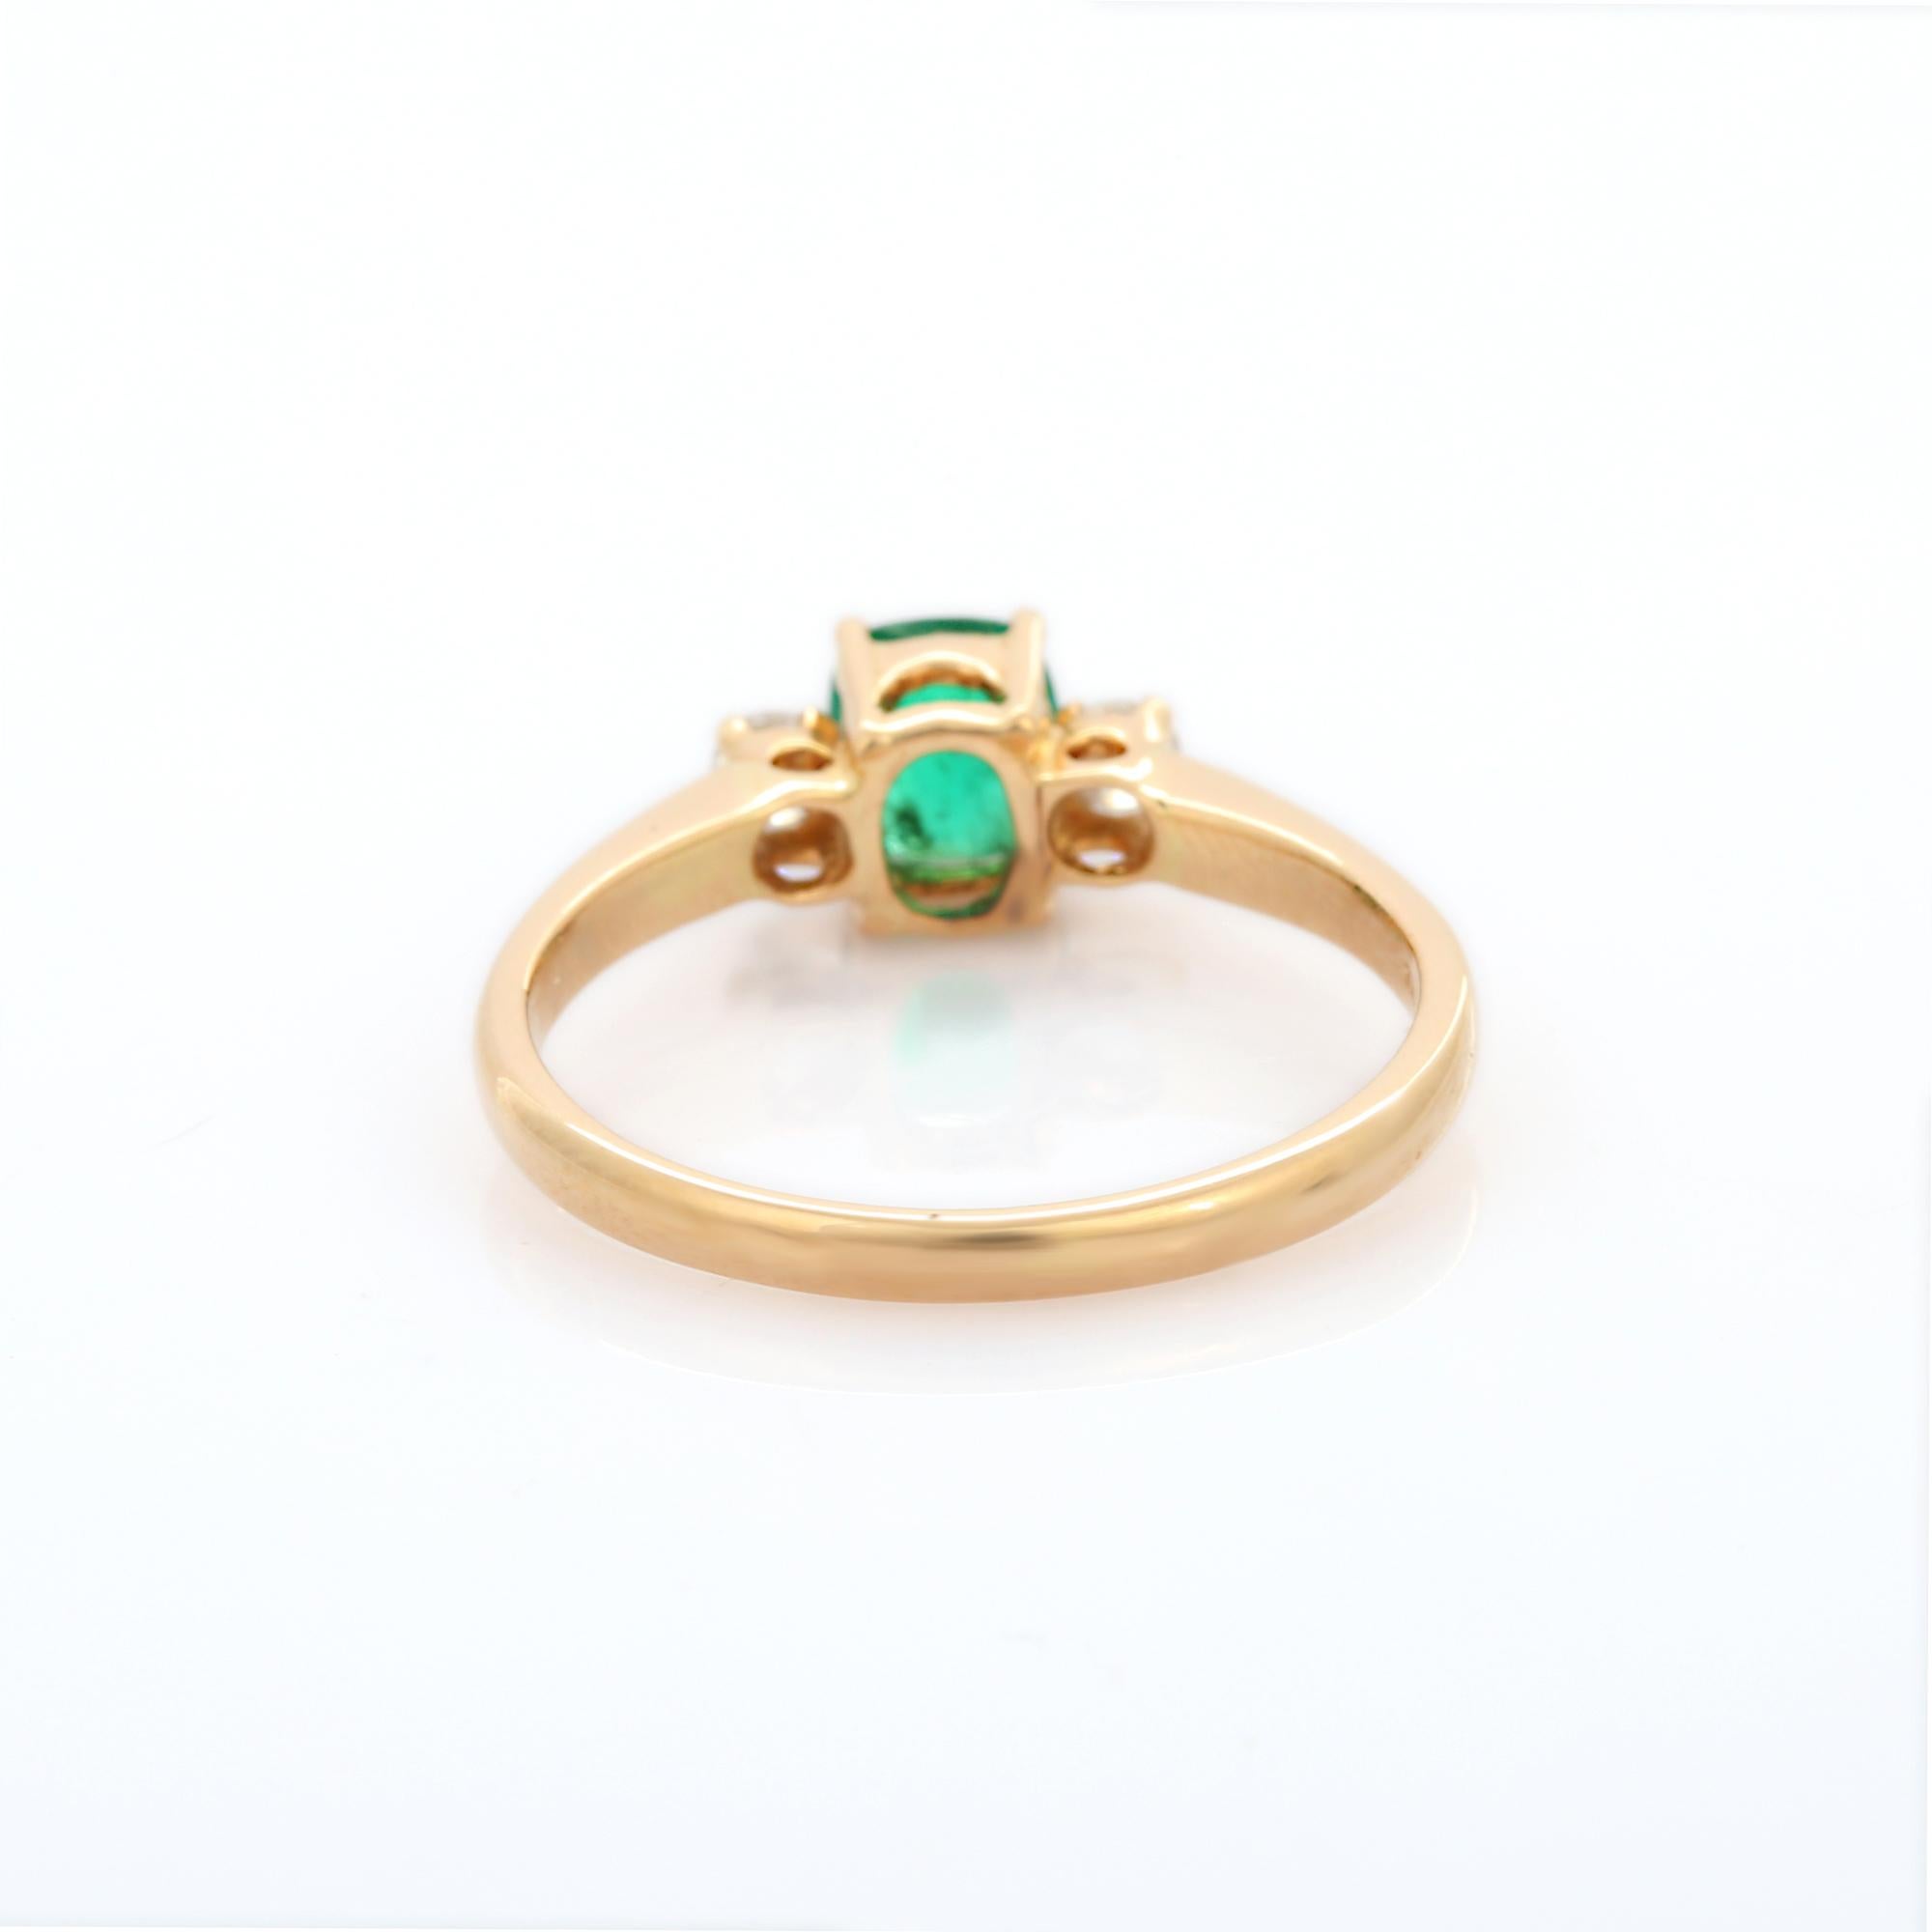 For Sale:  Emerald Gemstone Ring in 18k Solid Yellow Gold with Diamonds 6